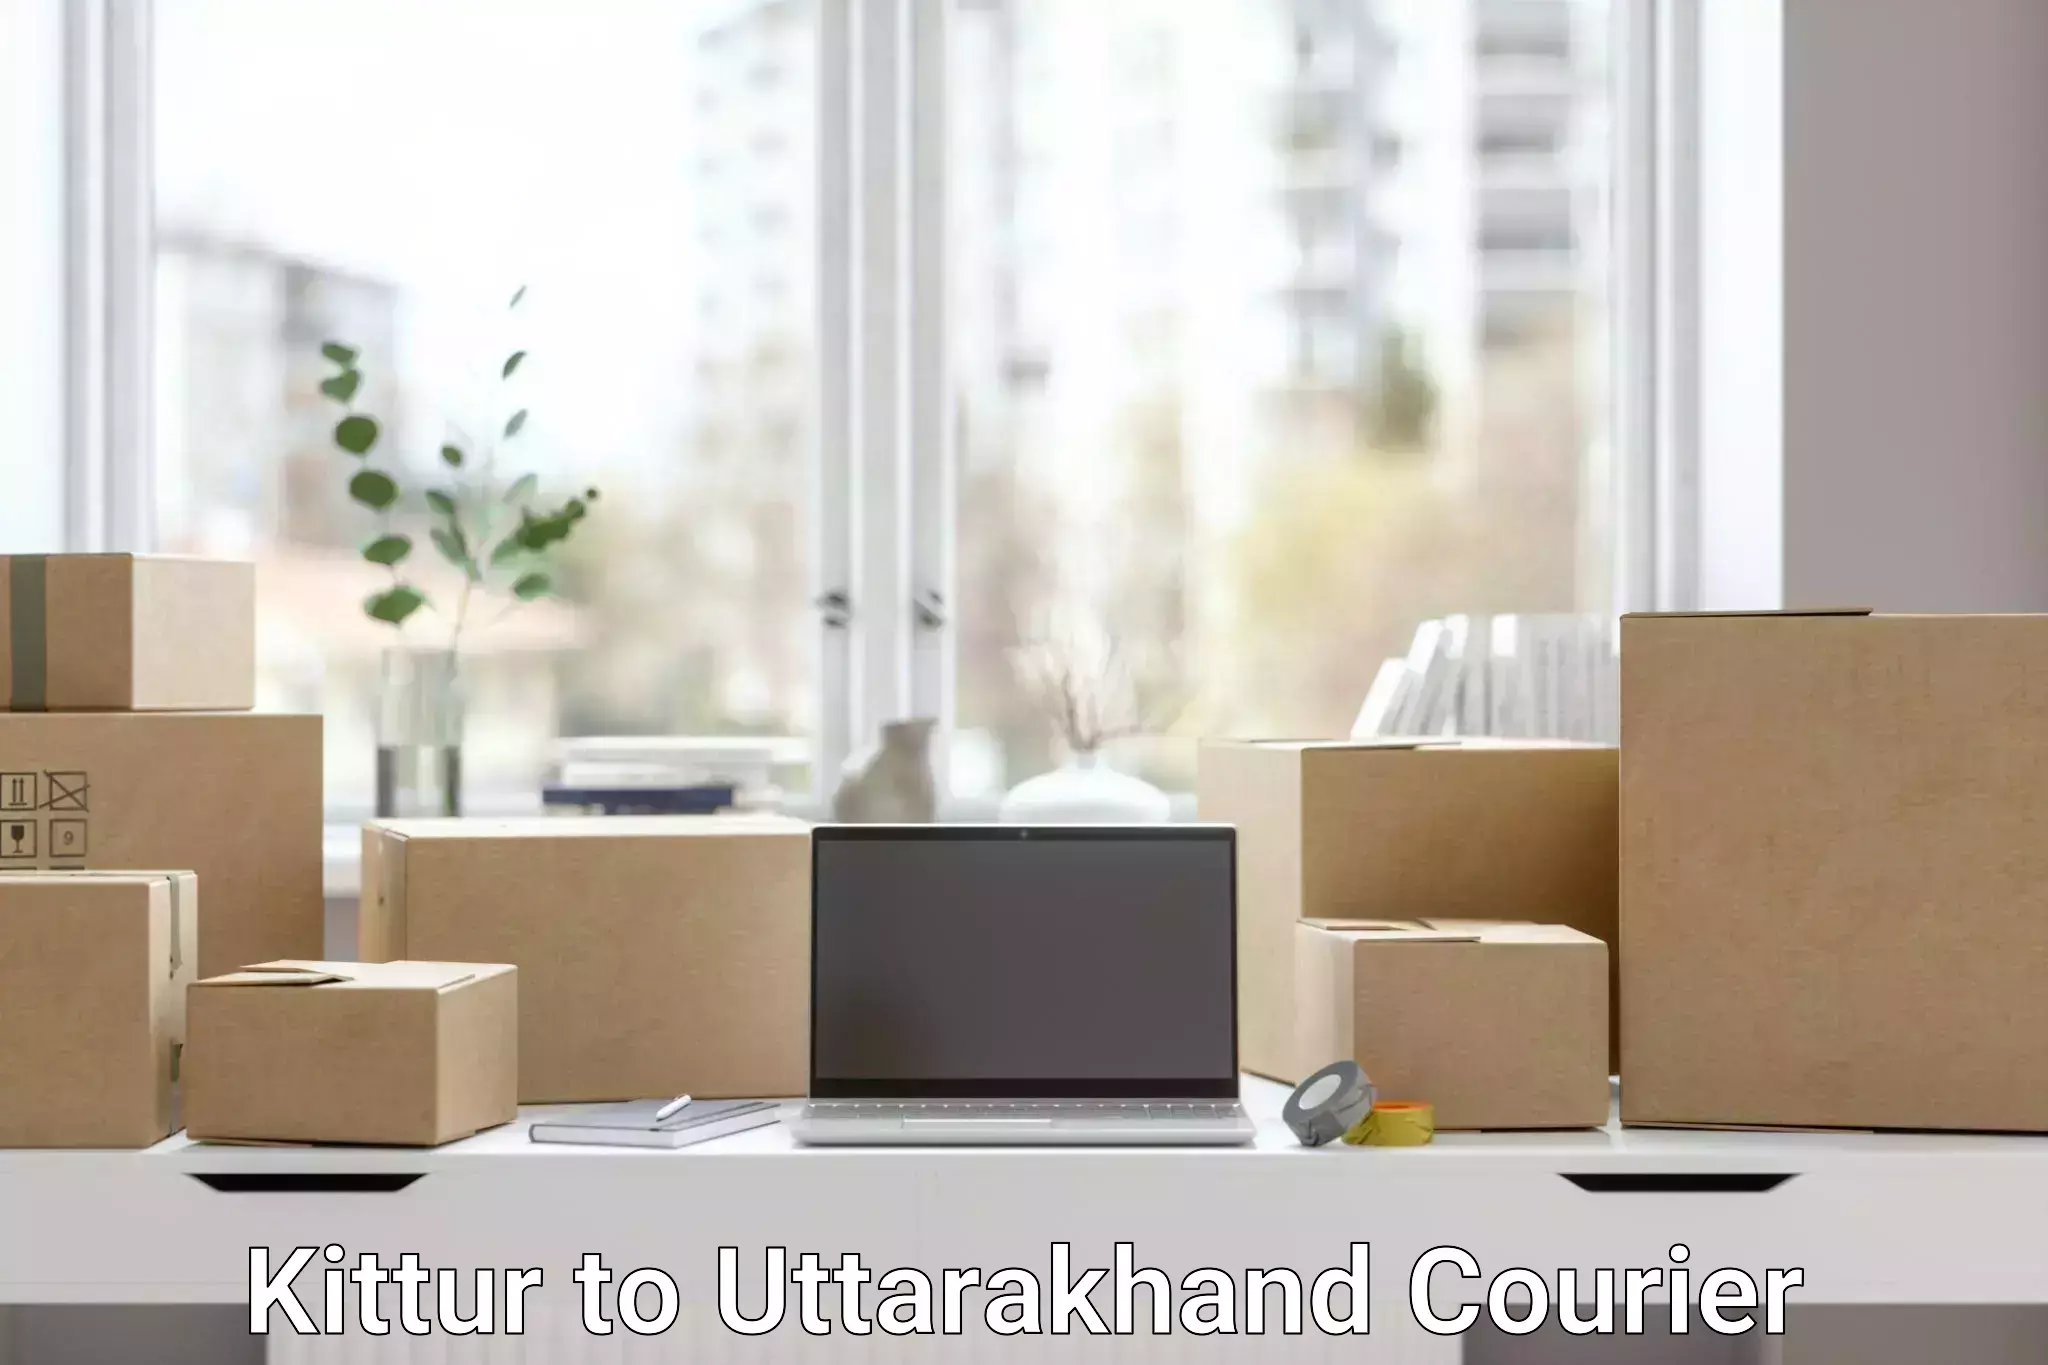 Advanced parcel tracking Kittur to Roorkee